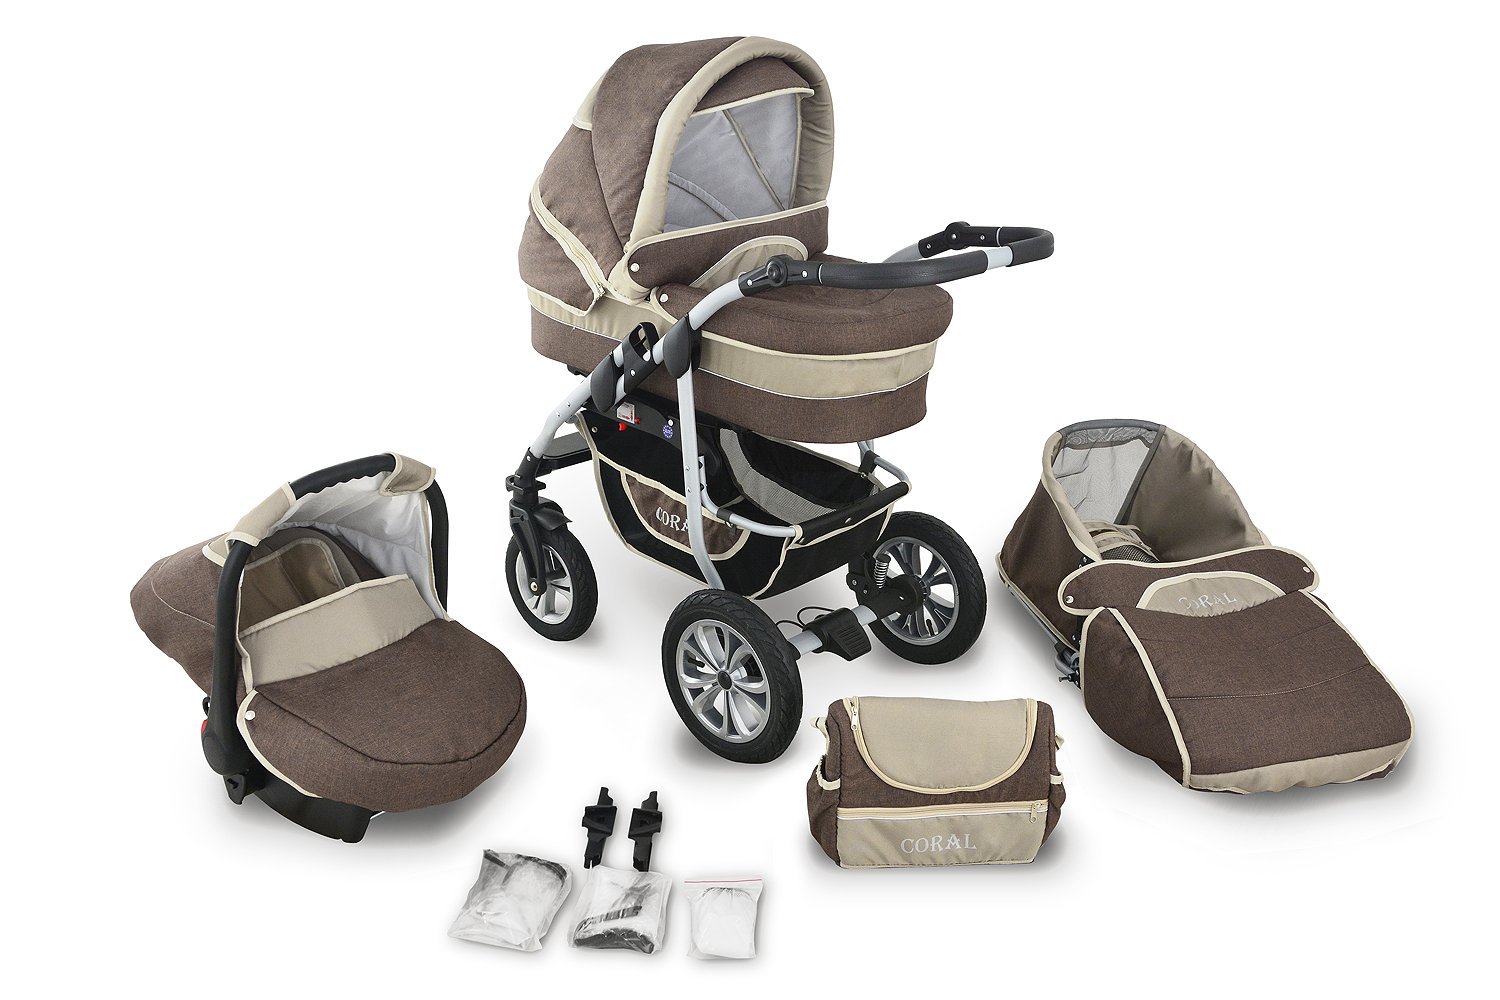 Clamaro \'CORAL 2019\' 3-in-1 Combi System (24 Colours) with Baby Cot, Sport Buggy and Car Seat (ISOFIX), Pneumatic Tyres, Adjustable Suspension 360° Swivel Wheels, Easy-Stop Brake  x-large